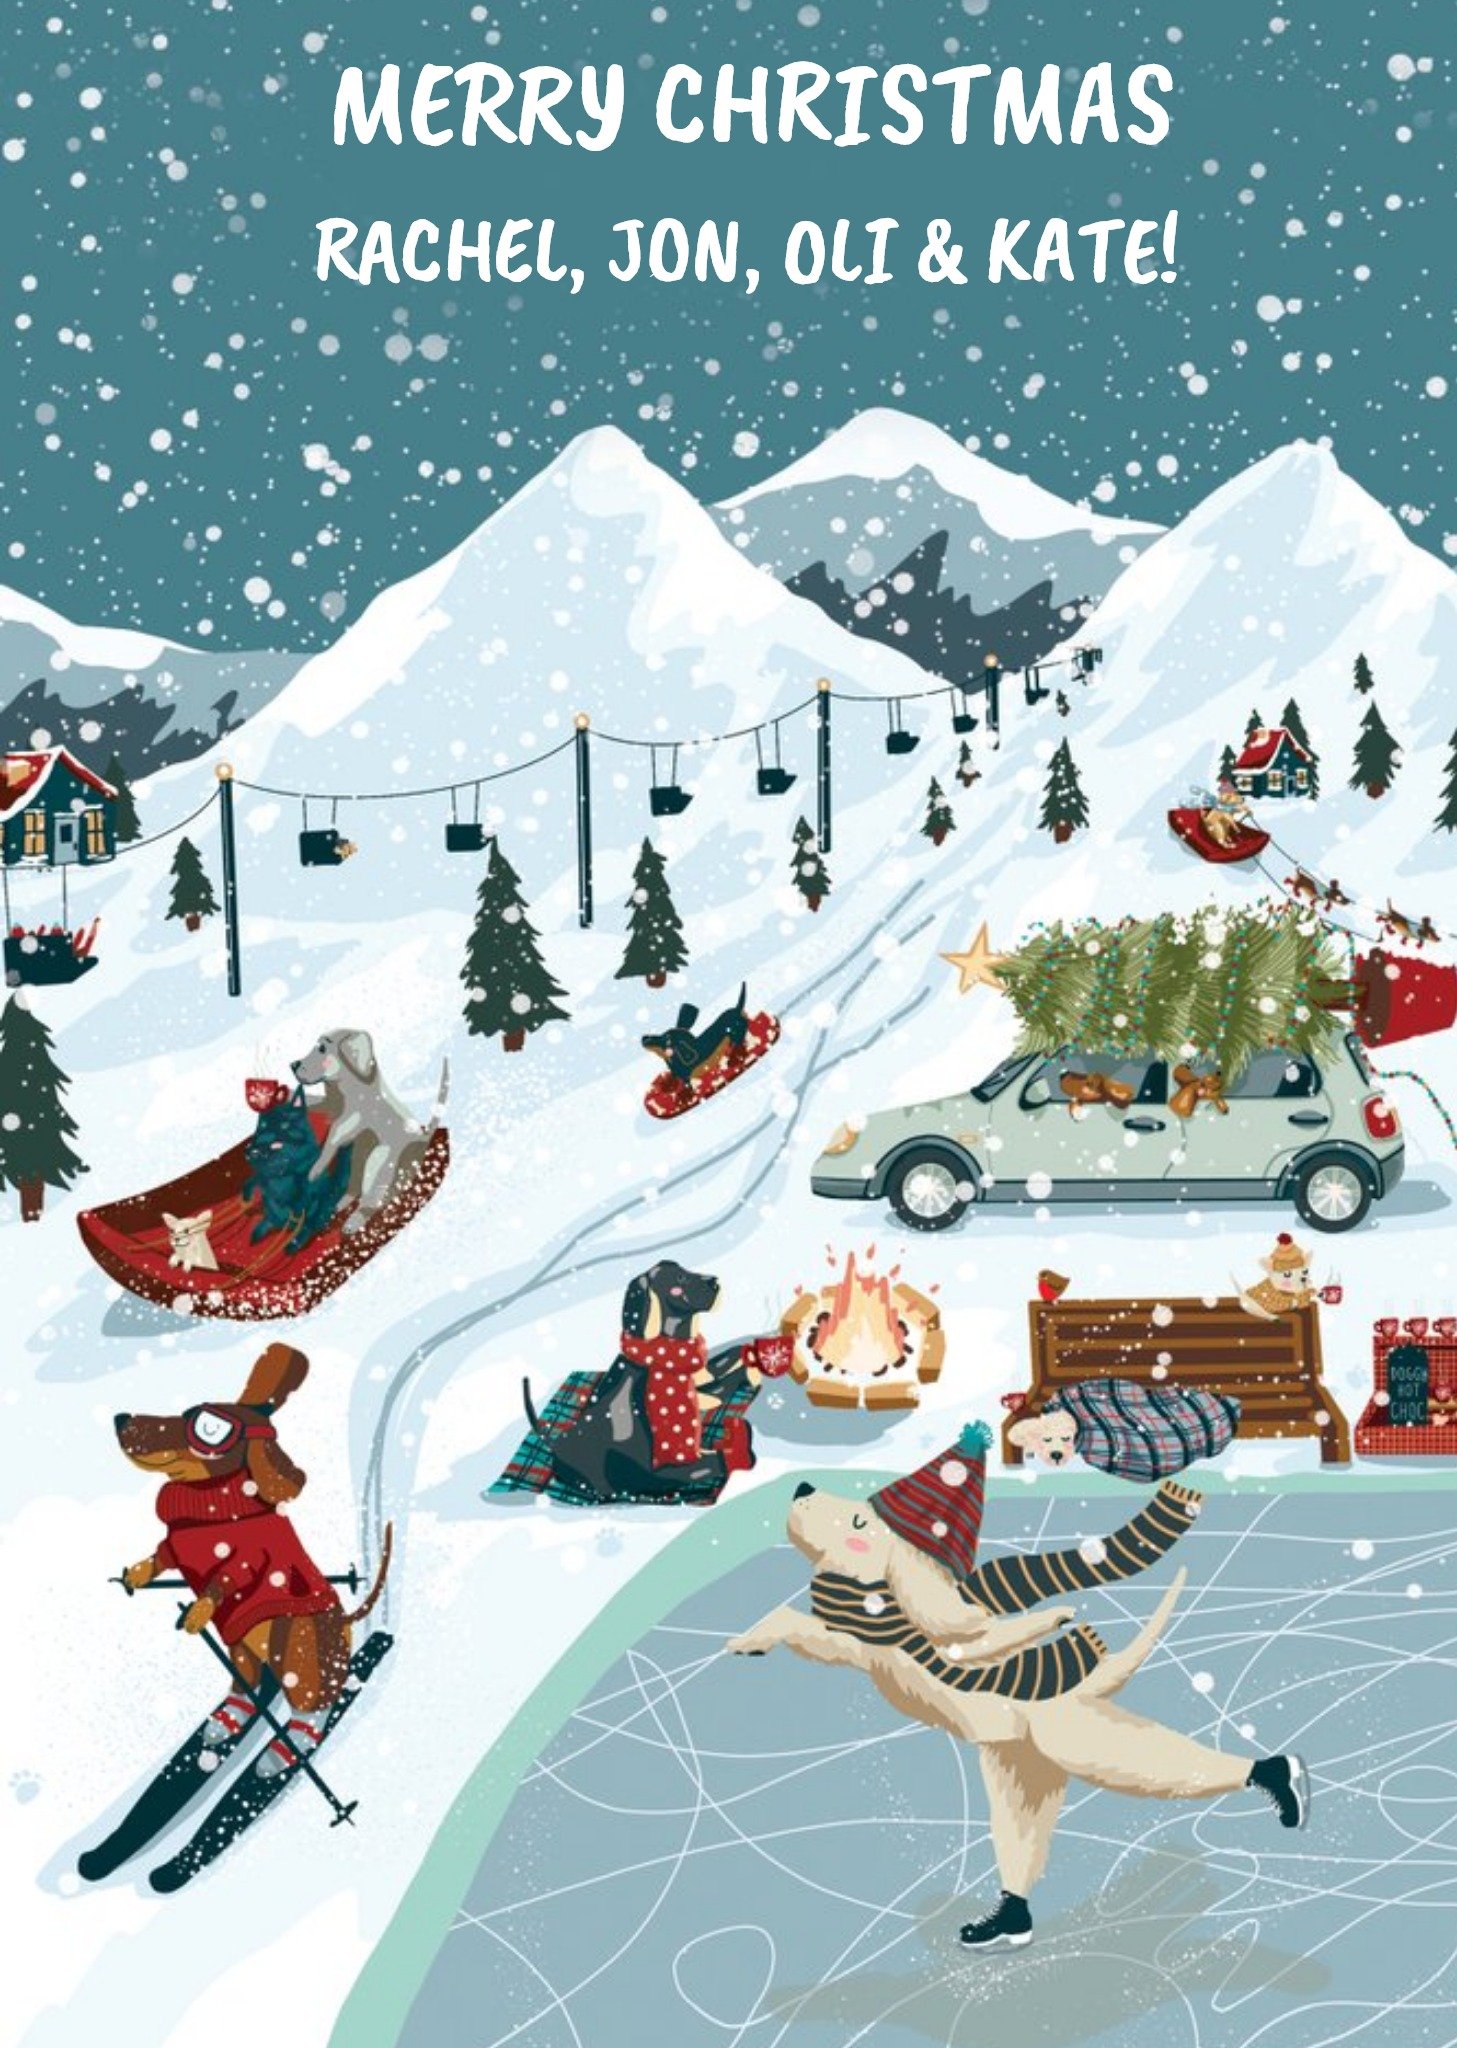 Moonpig Ttraditional Illustration Of A Christmas Scene With Dogs Skiing And Ice Skating Card, Large